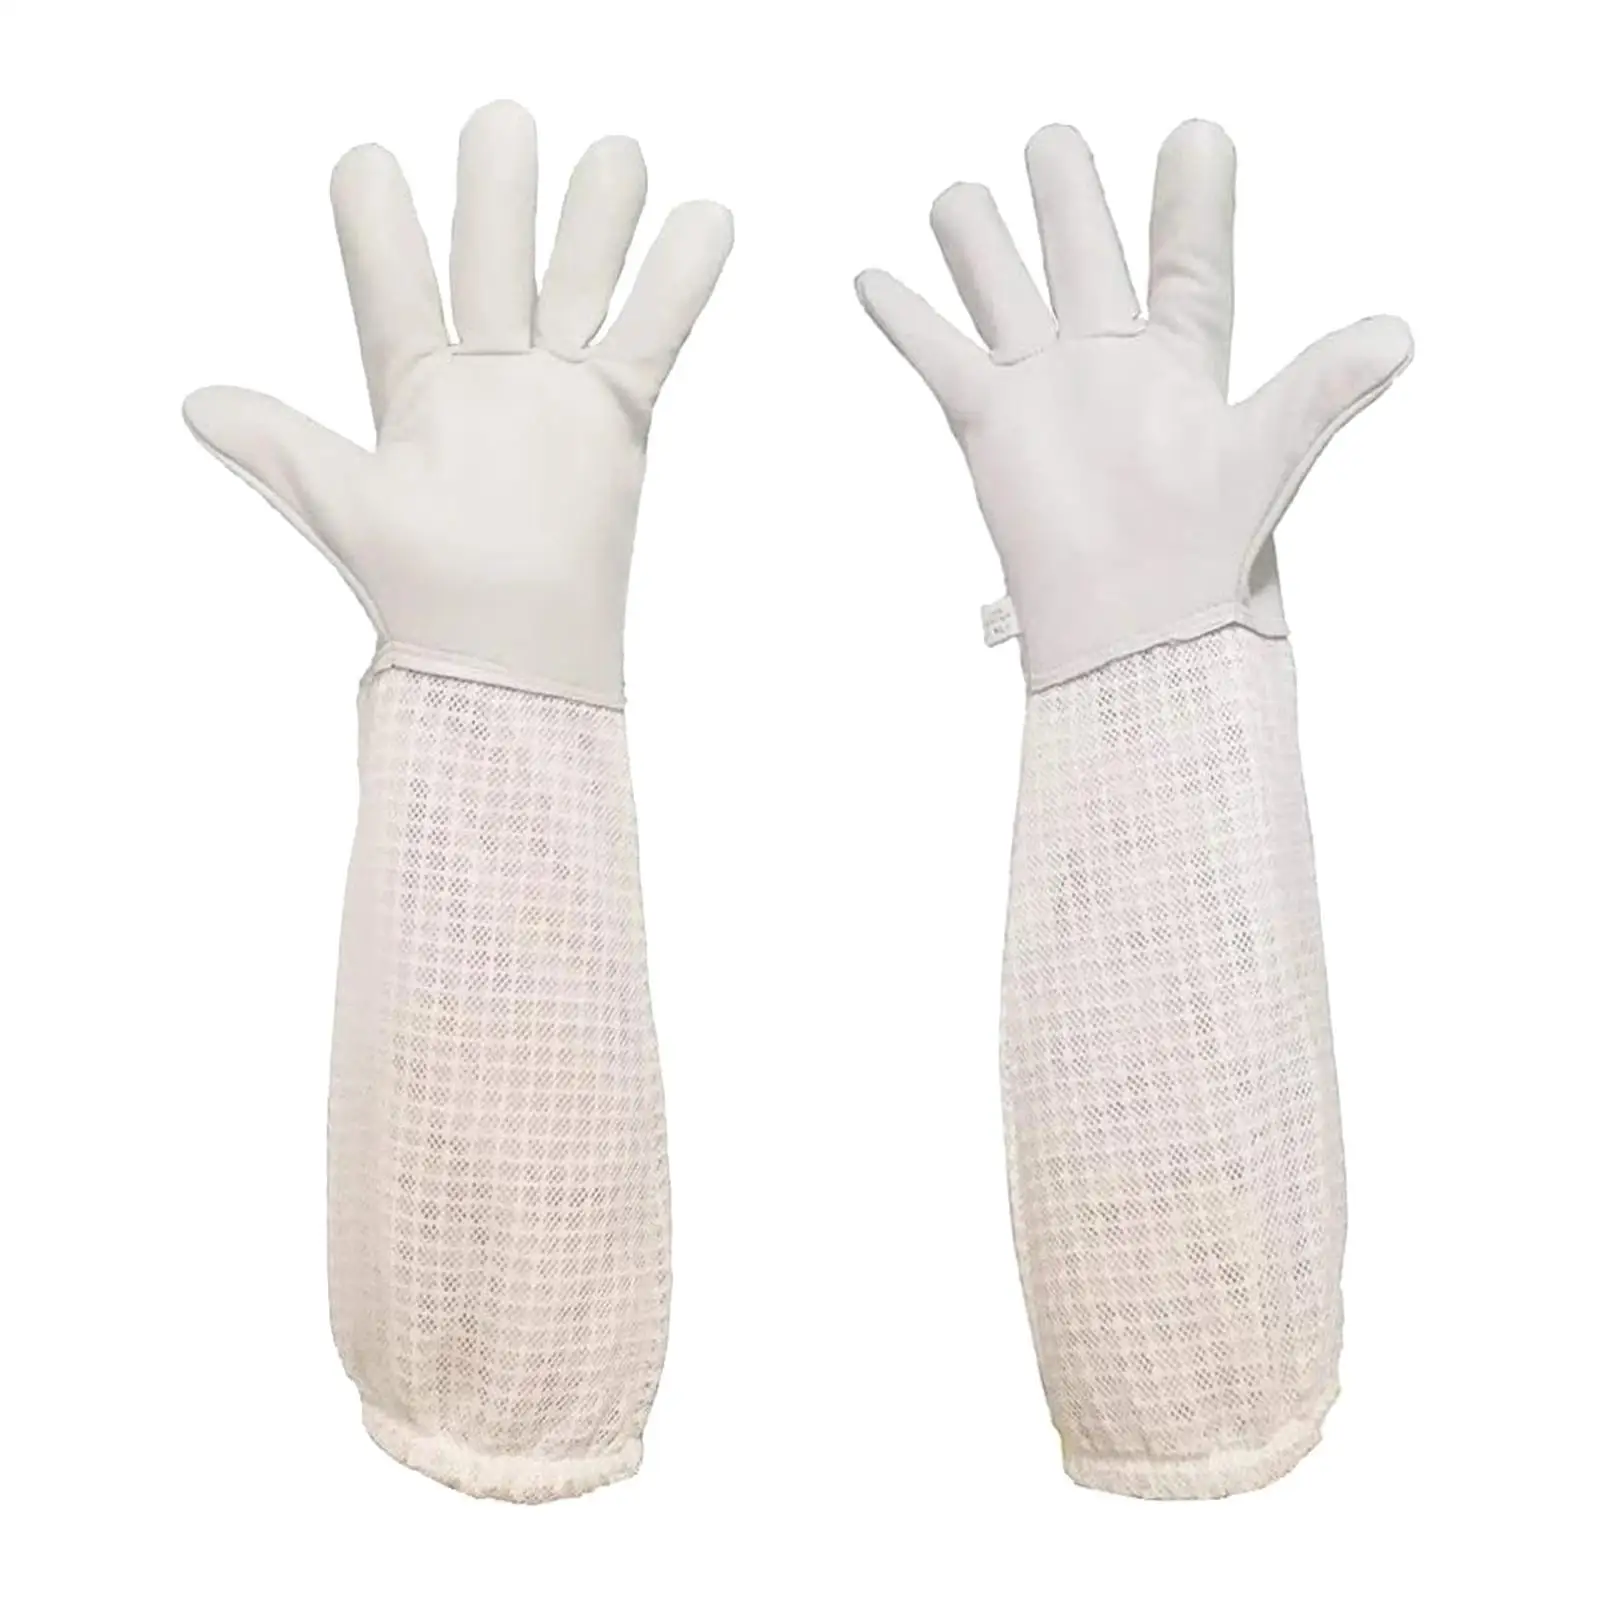 Anti Bee Gloves Beekeeping Gloves Protective Anti Pricks Beekeeping Tools Beekeeping Supplies Anti Sting for Unisex